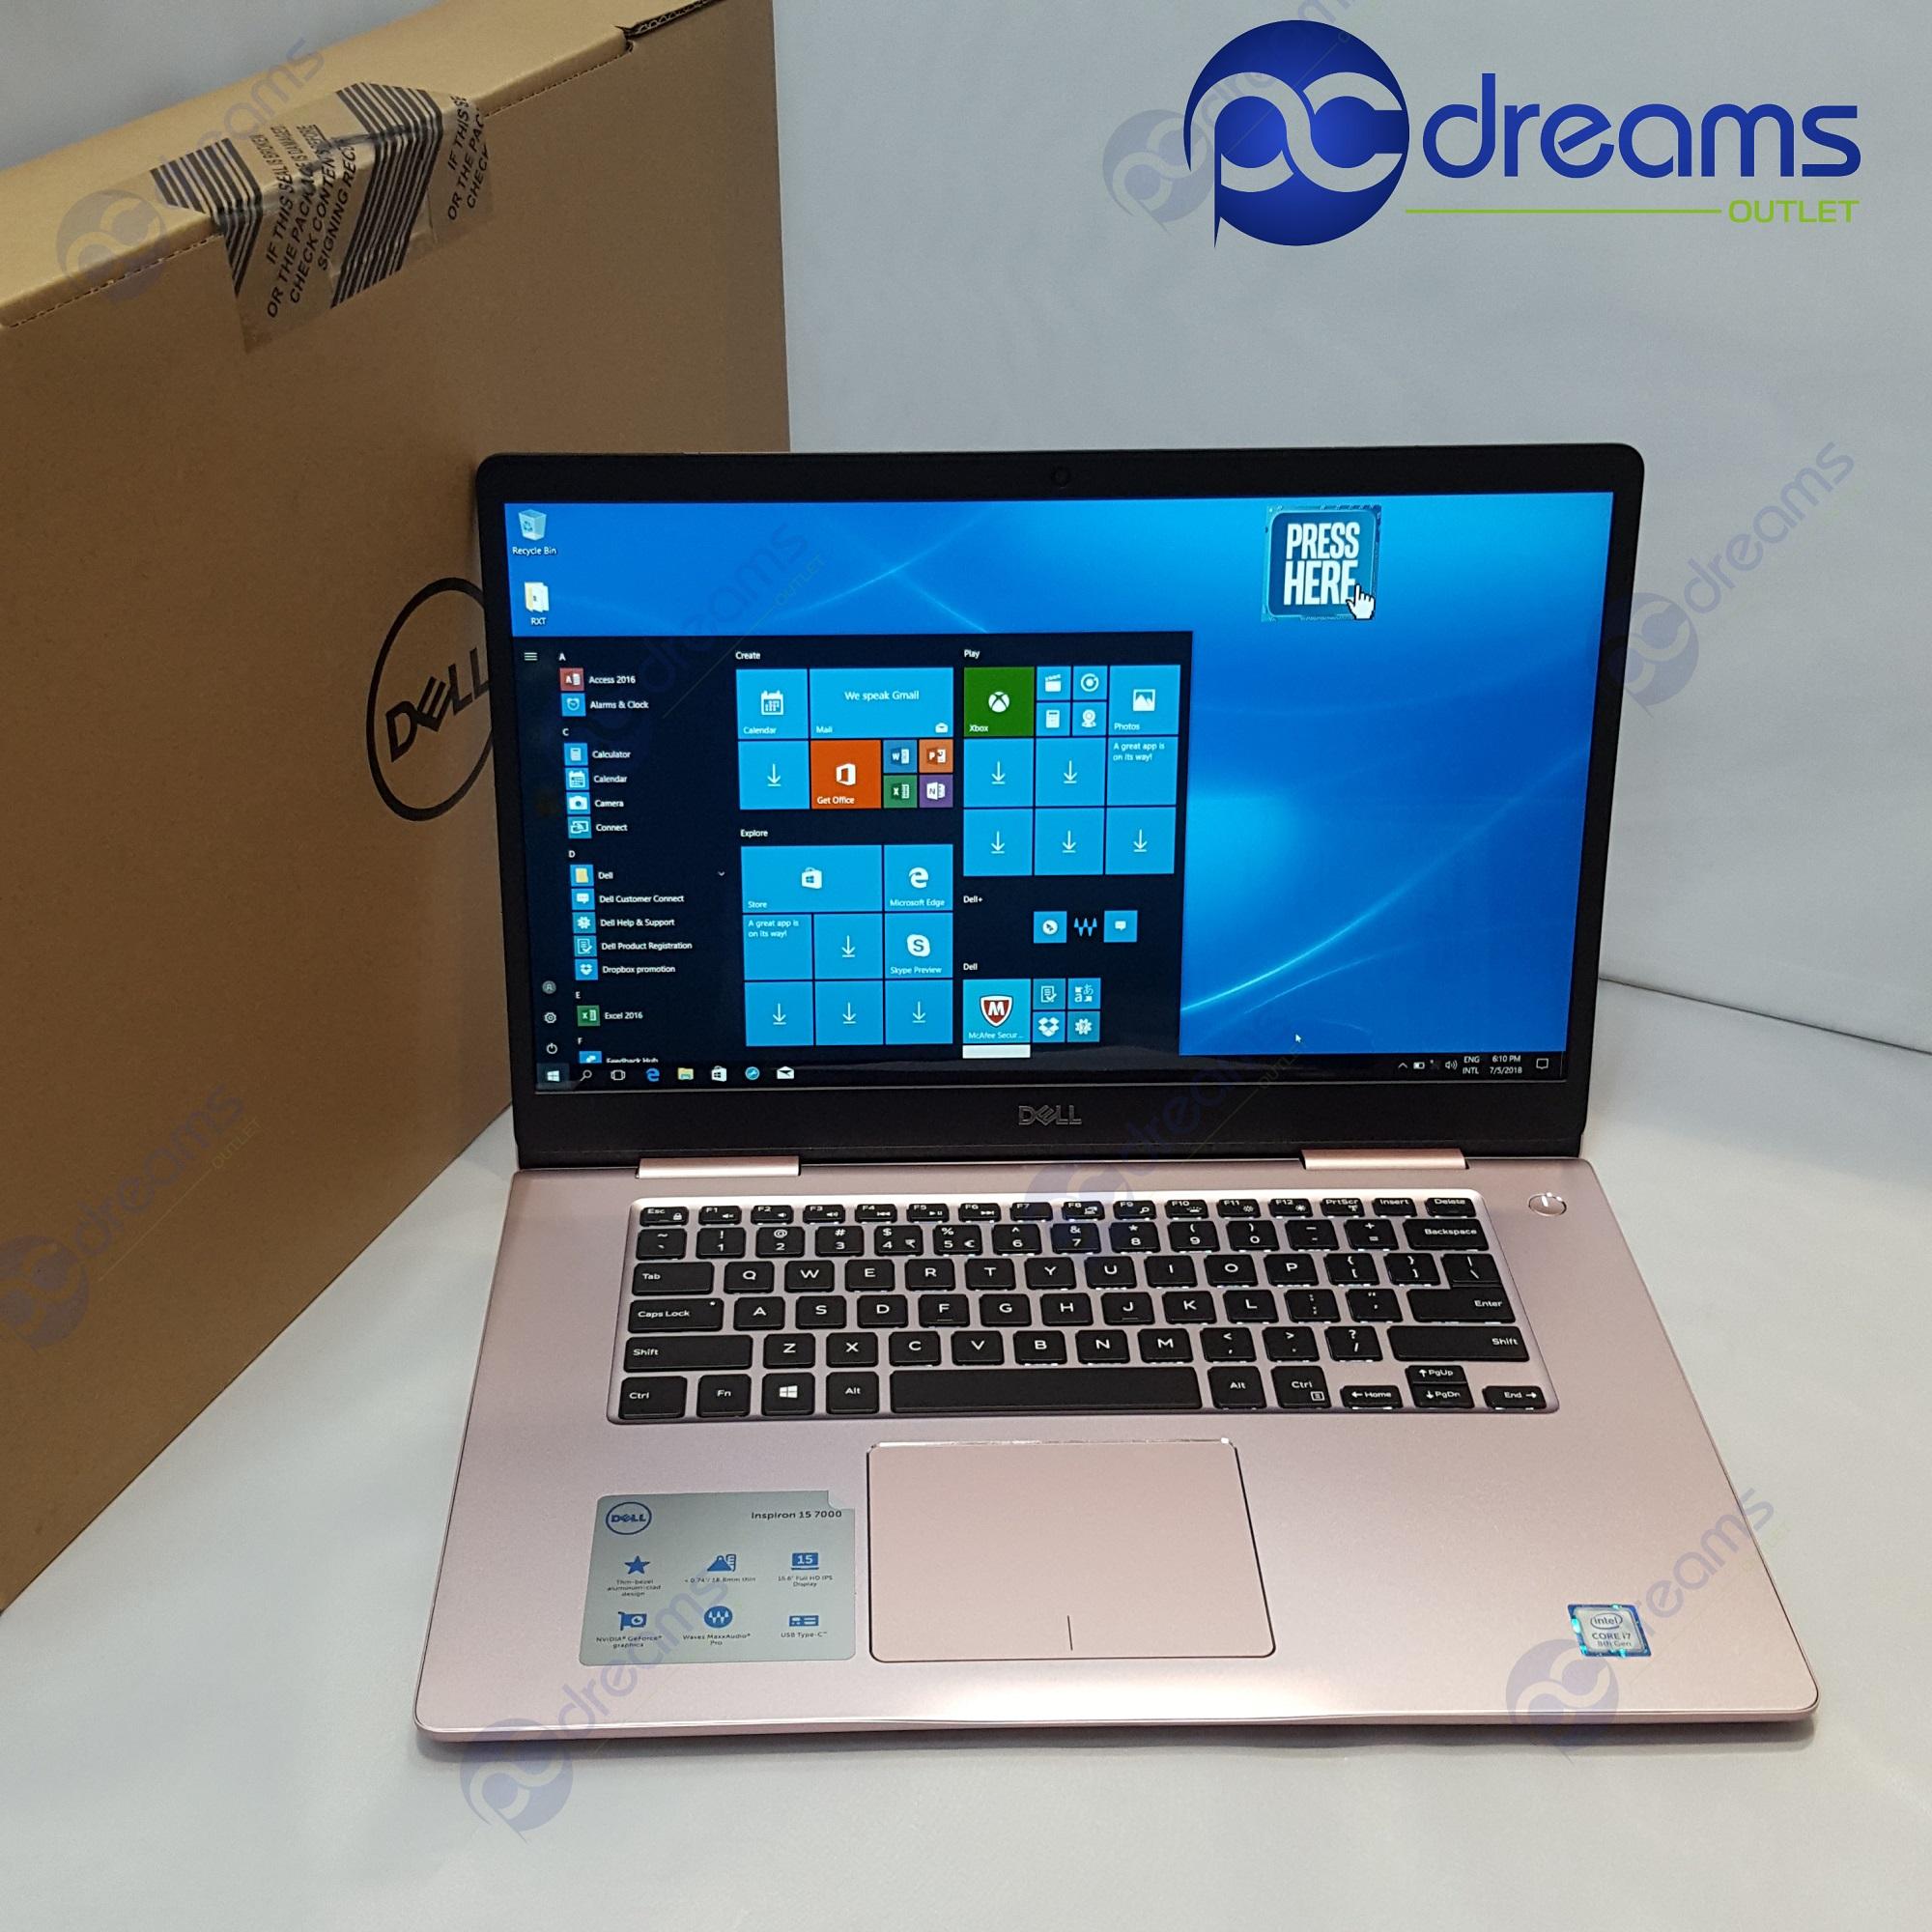 BLACK FRIDAY! DELL INSPIRON 7570-855814GL-W10 (CHAMPAGNE PINK COLOR) i7-8550U/8GB/256GBSSD+1TBHDD [Brand New]